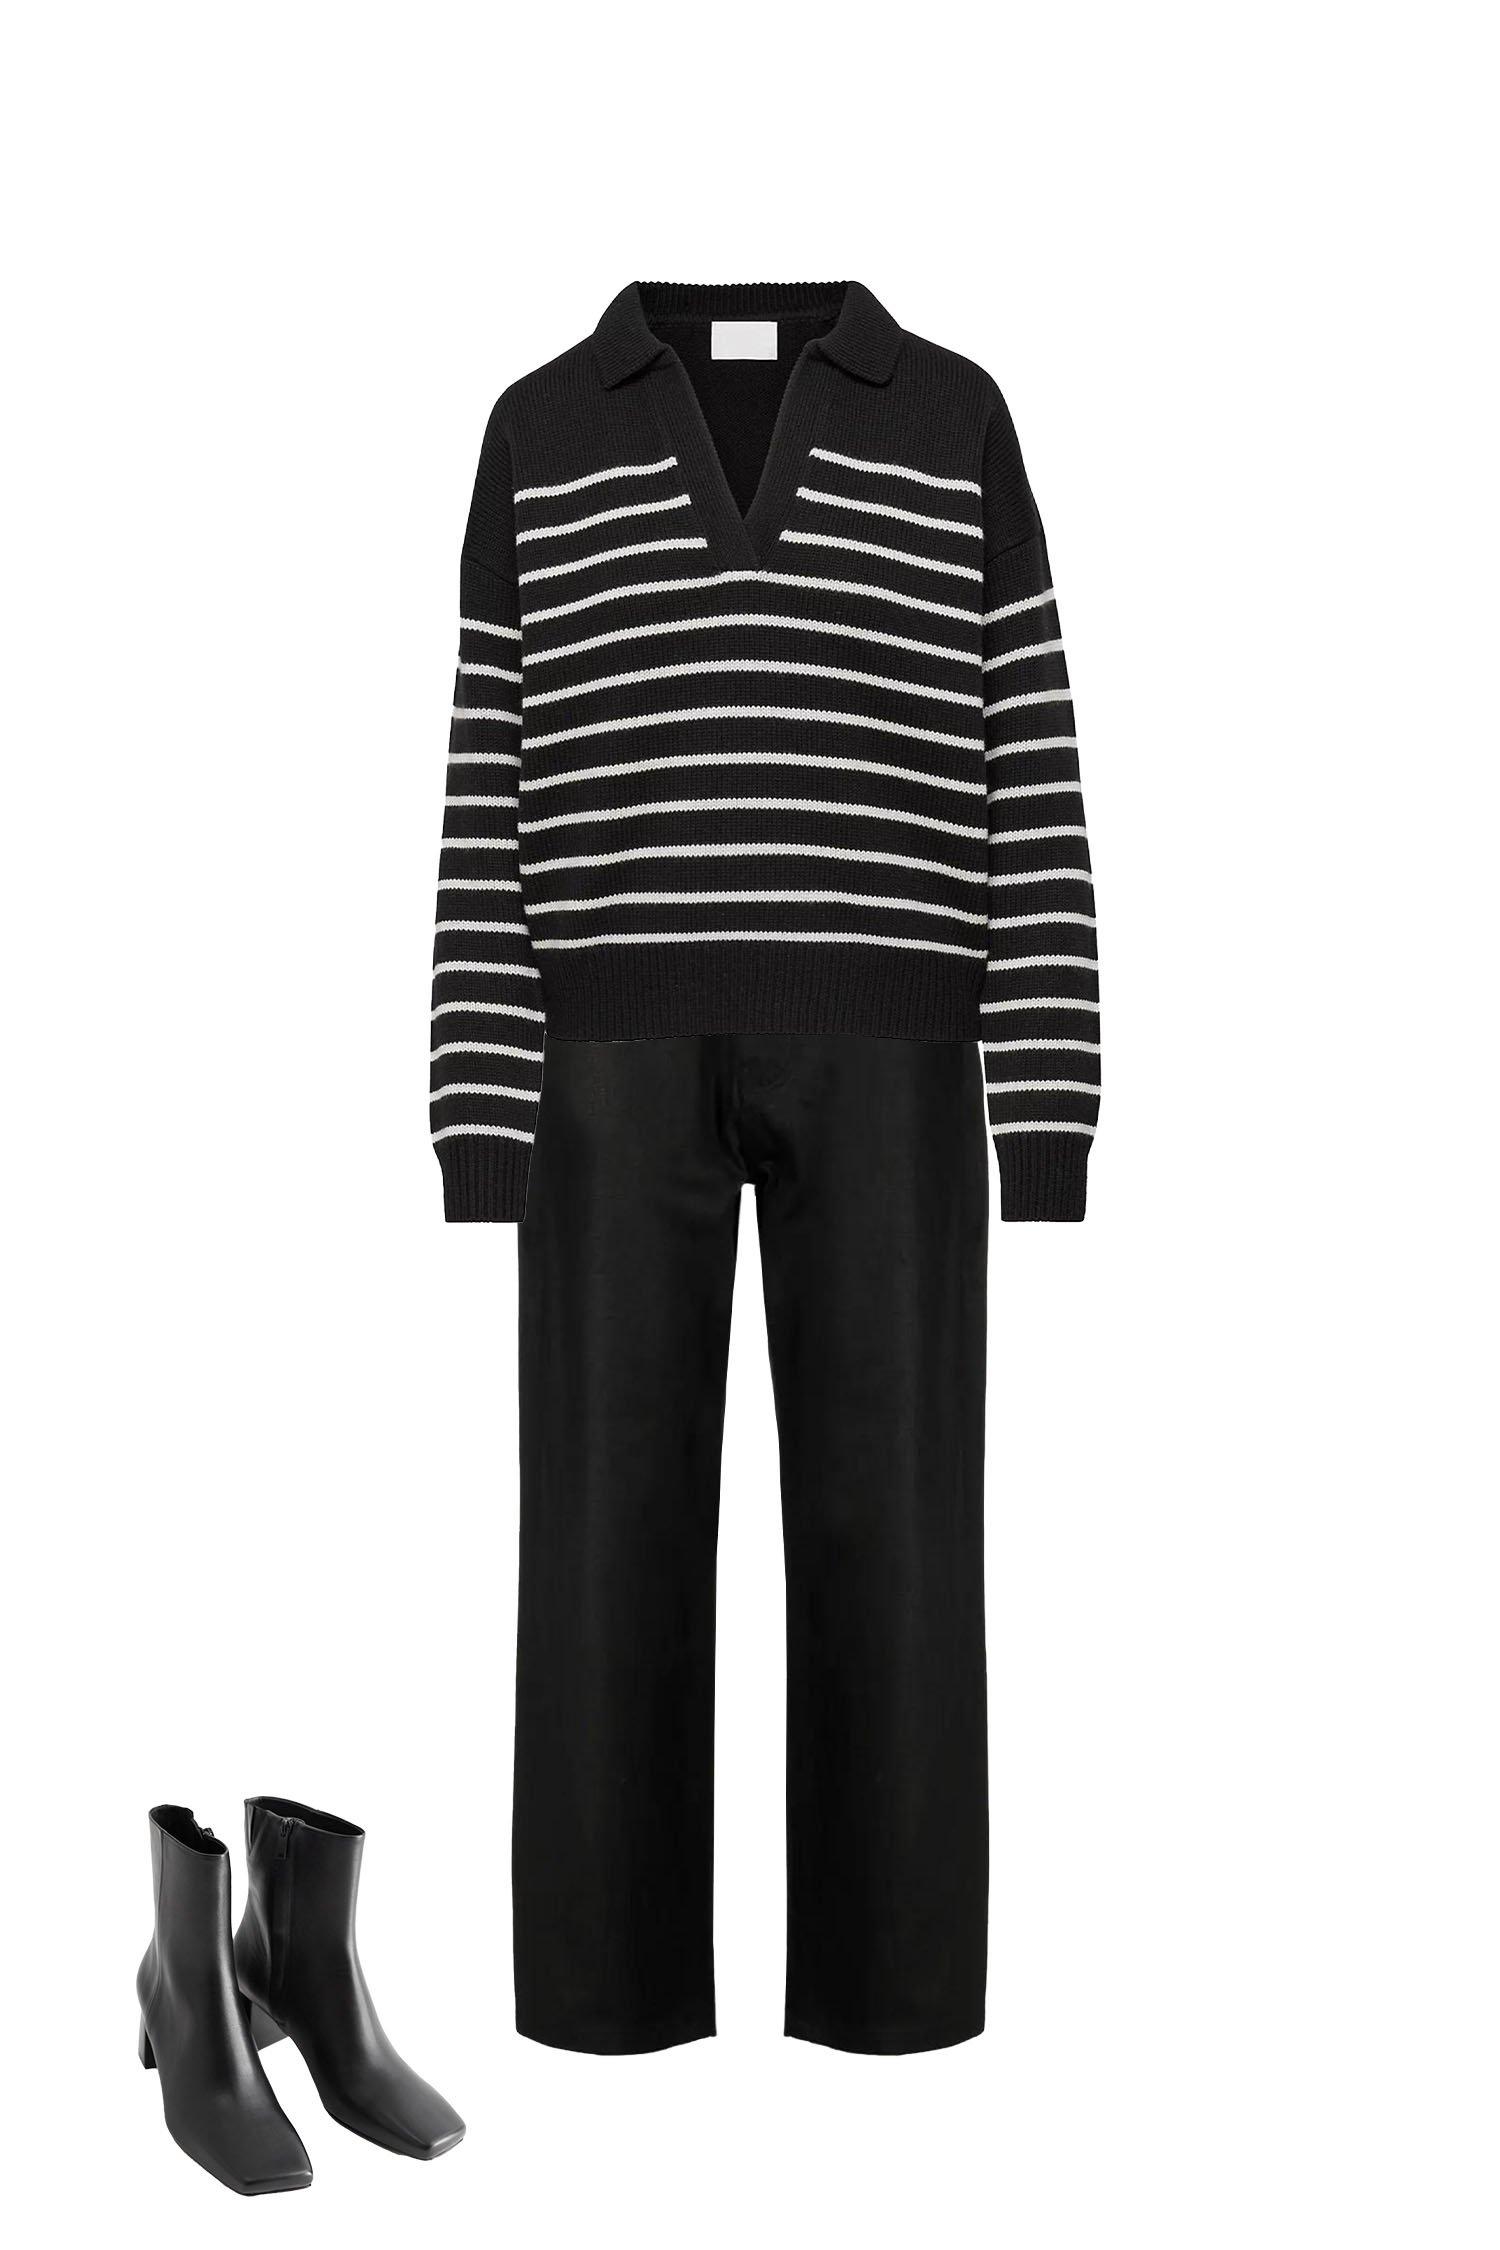 Chic and Cozy Jeans and Sweater - Black Straight Wide-Leg Crop Jeans, Black Collared White Stripe Sweater, Black Square-Toe Ankle Boots